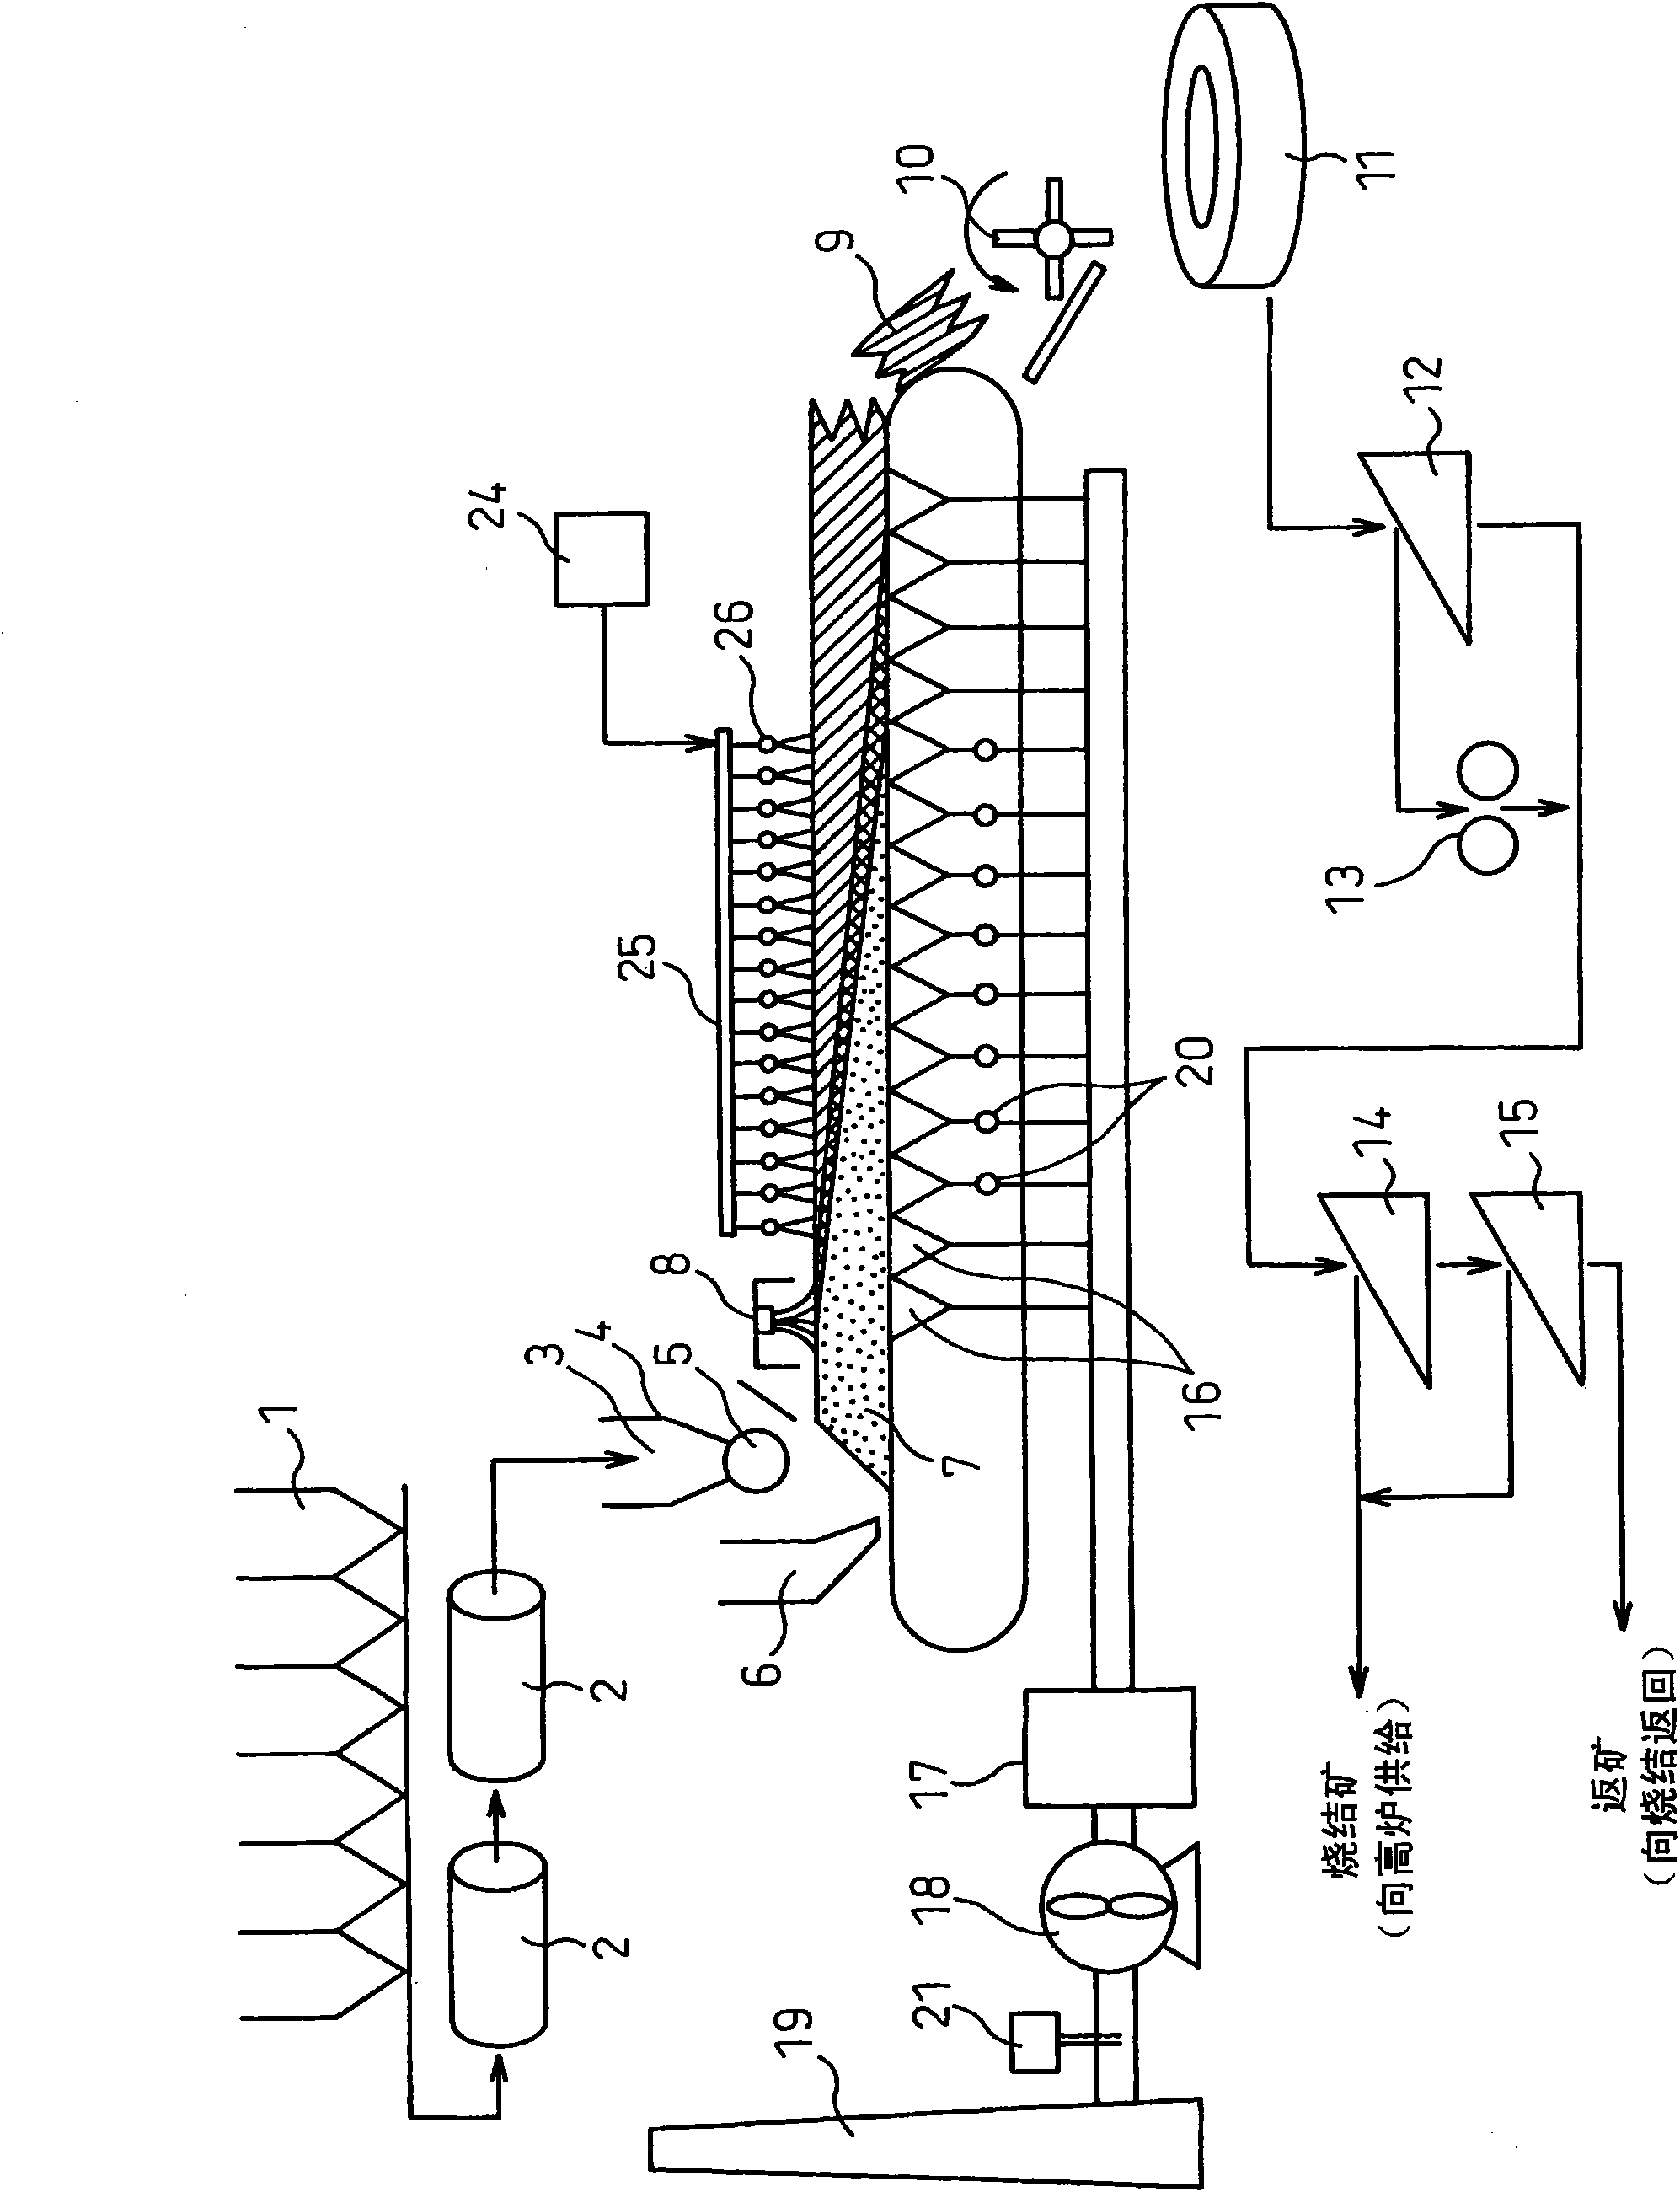 Process for producing sintered ore and sintering machine